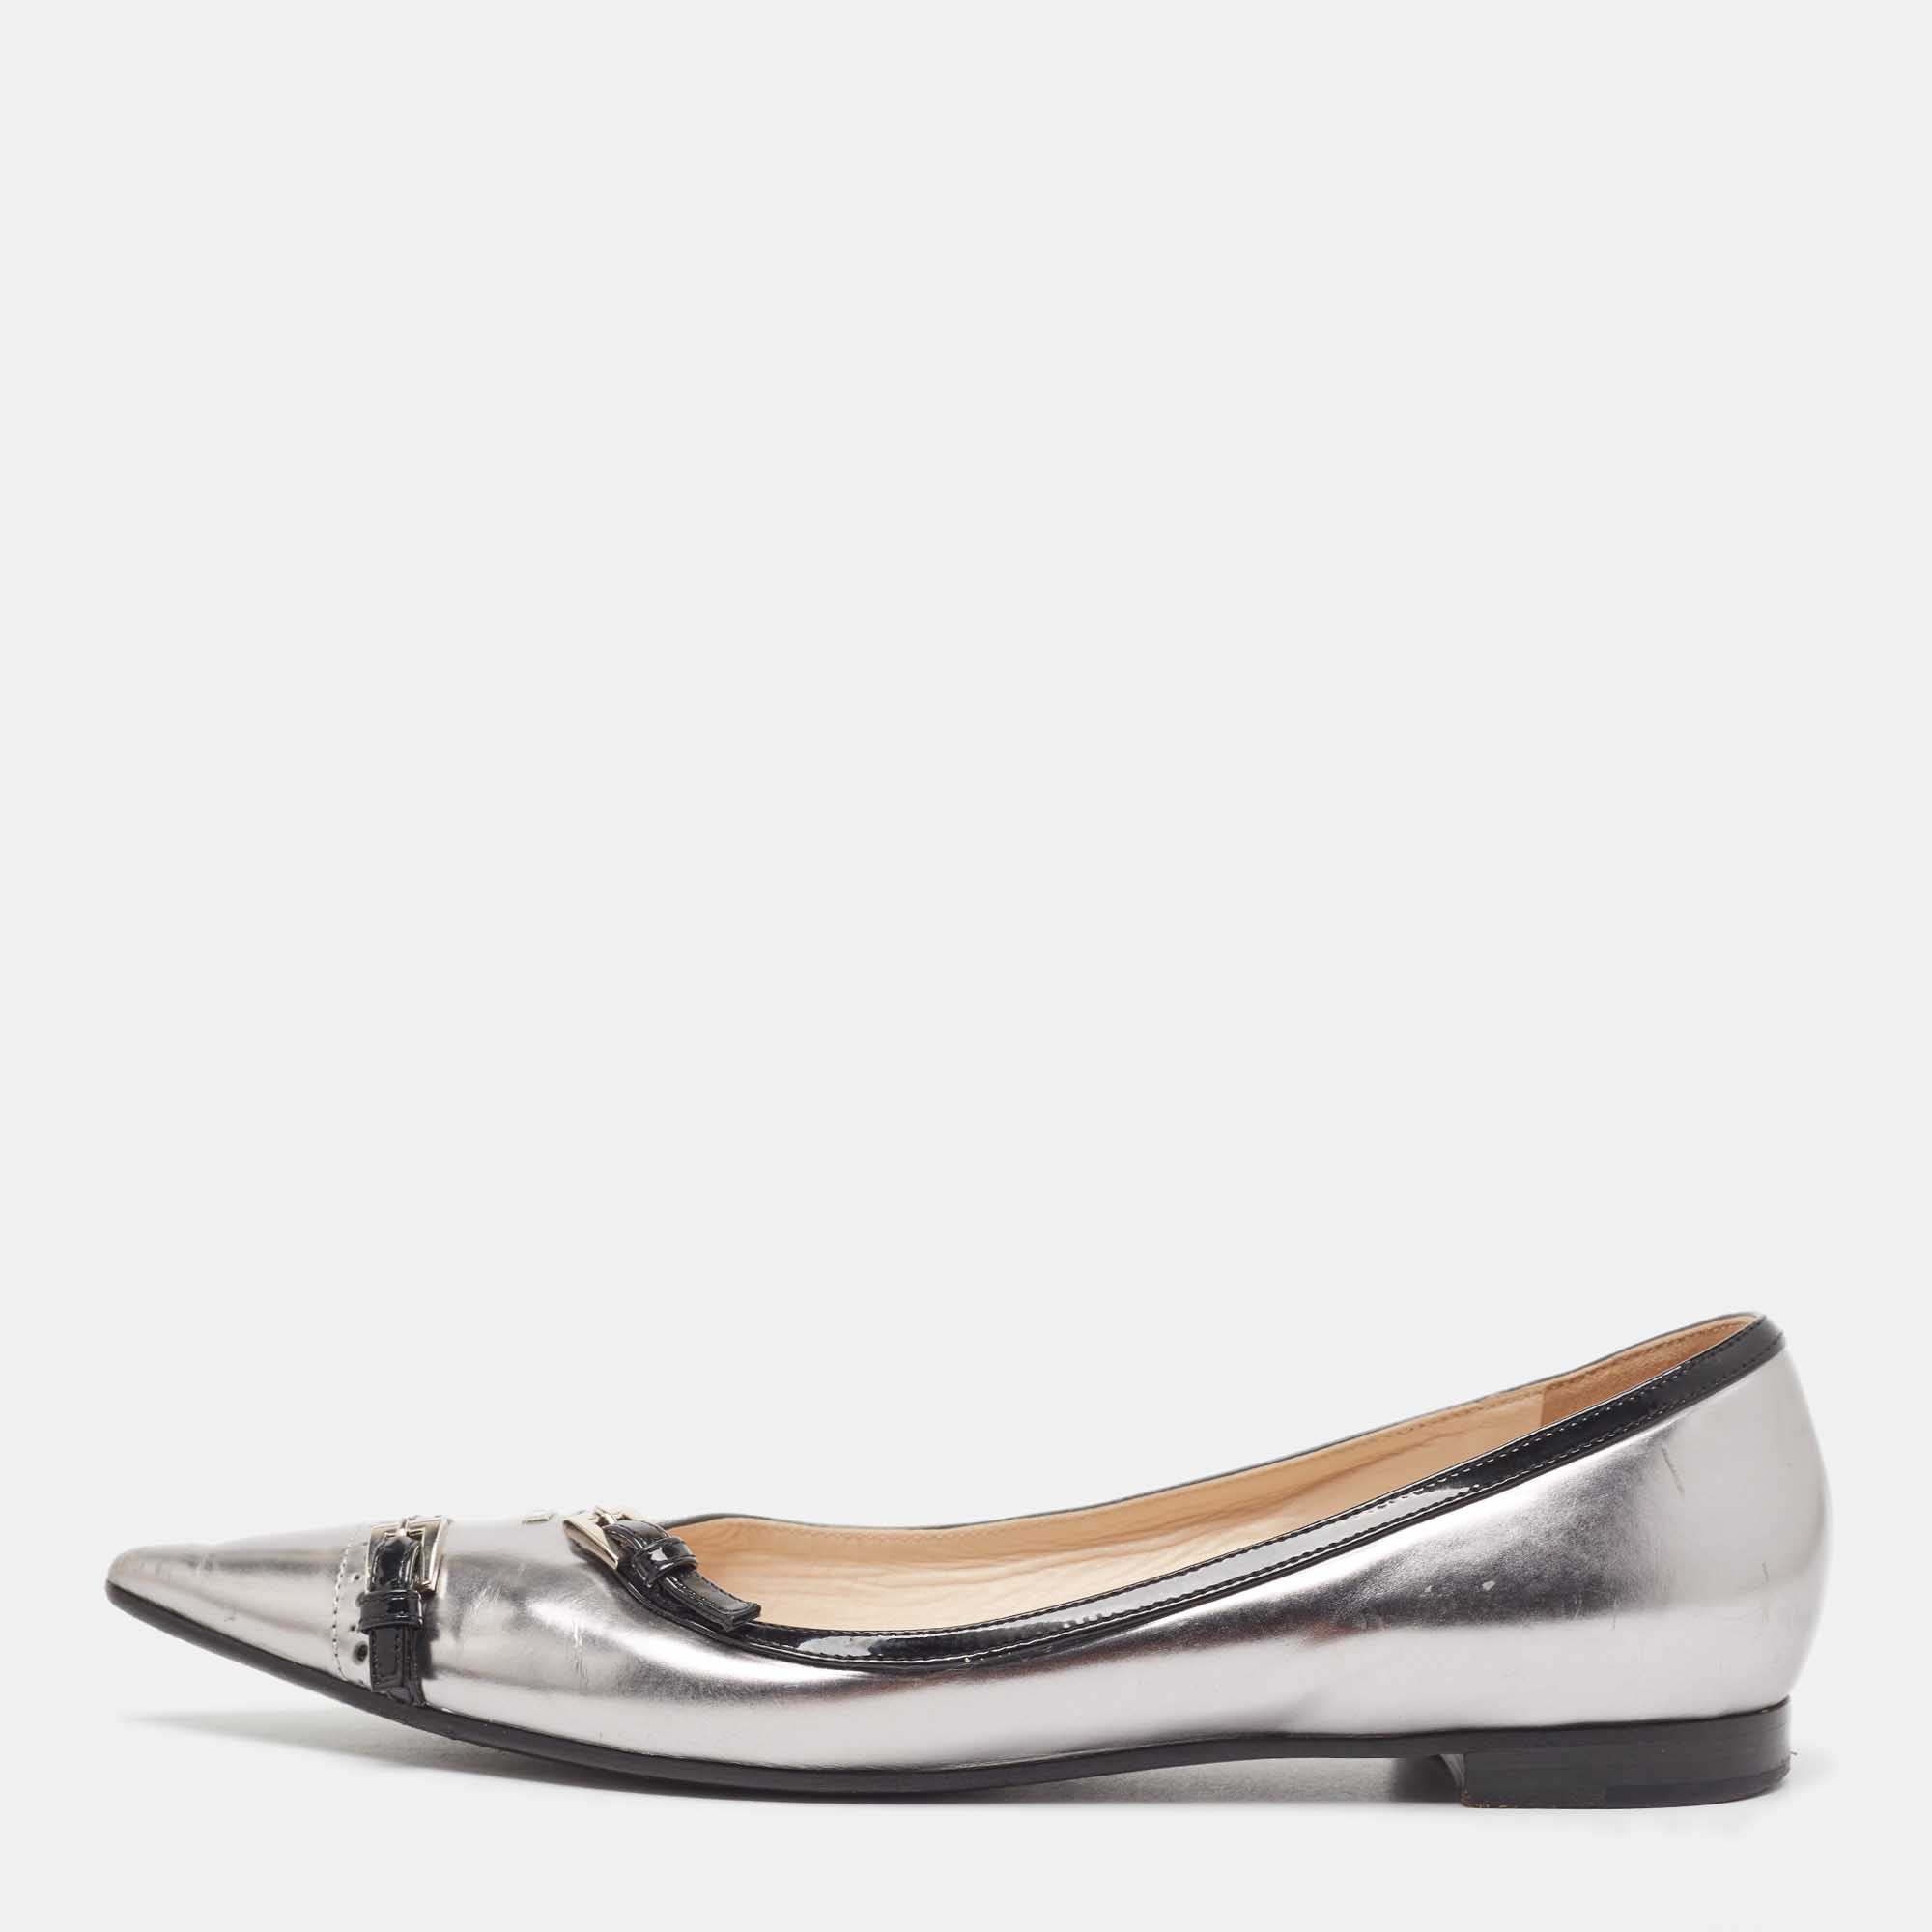 

Prada Silver/Black Patent and Leather Buckle Detail Pointed Toe Ballet Flats Size